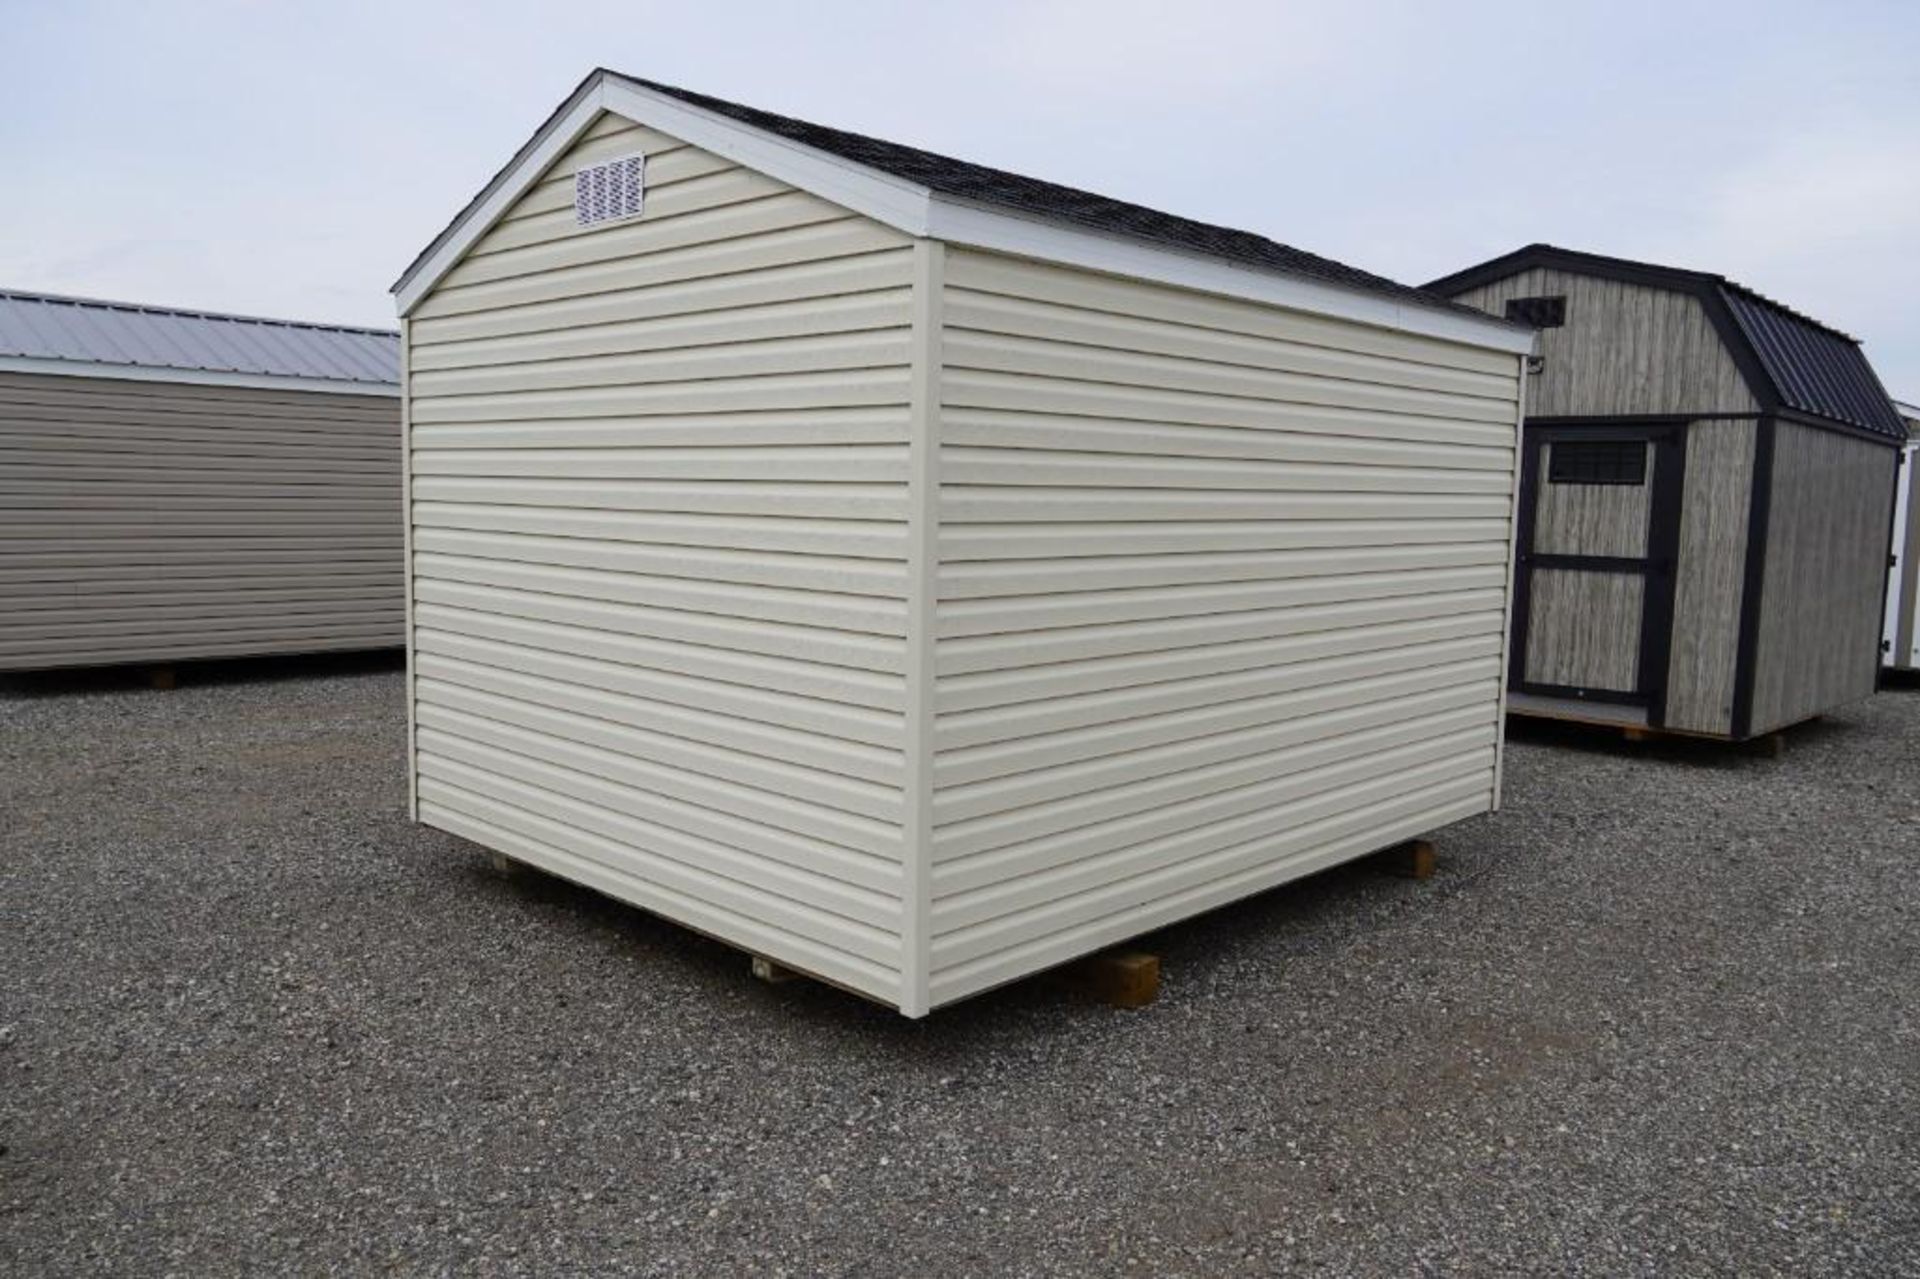 New 10' x 12' Vinyl Shed - Image 3 of 6